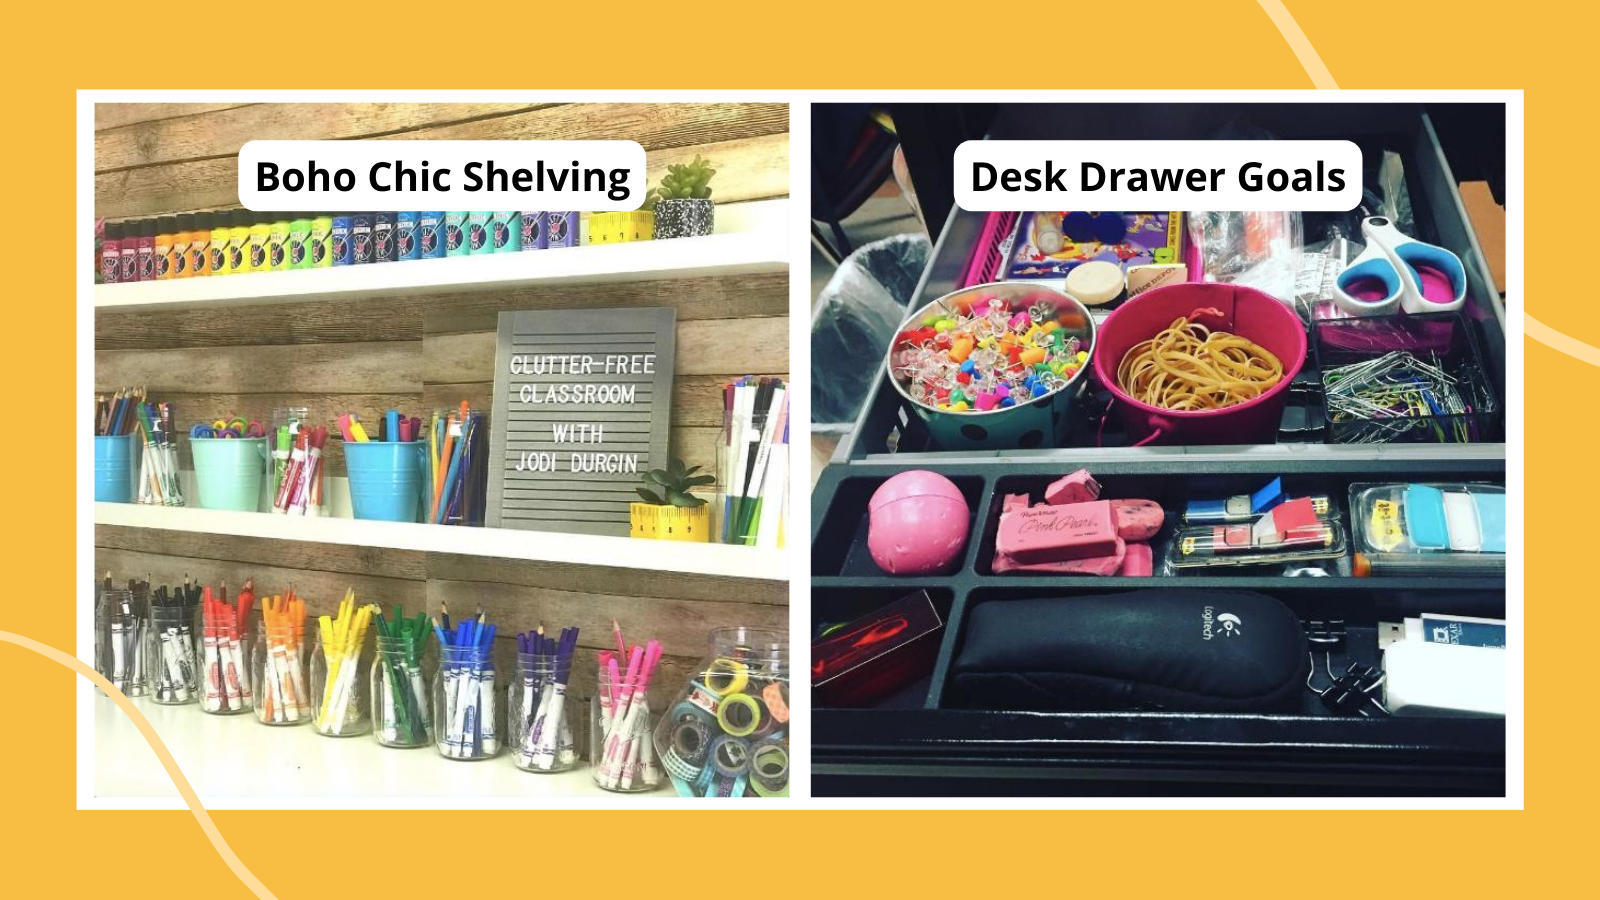 21 of the Best Classroom Organization Supplies and How to Use Them! ·